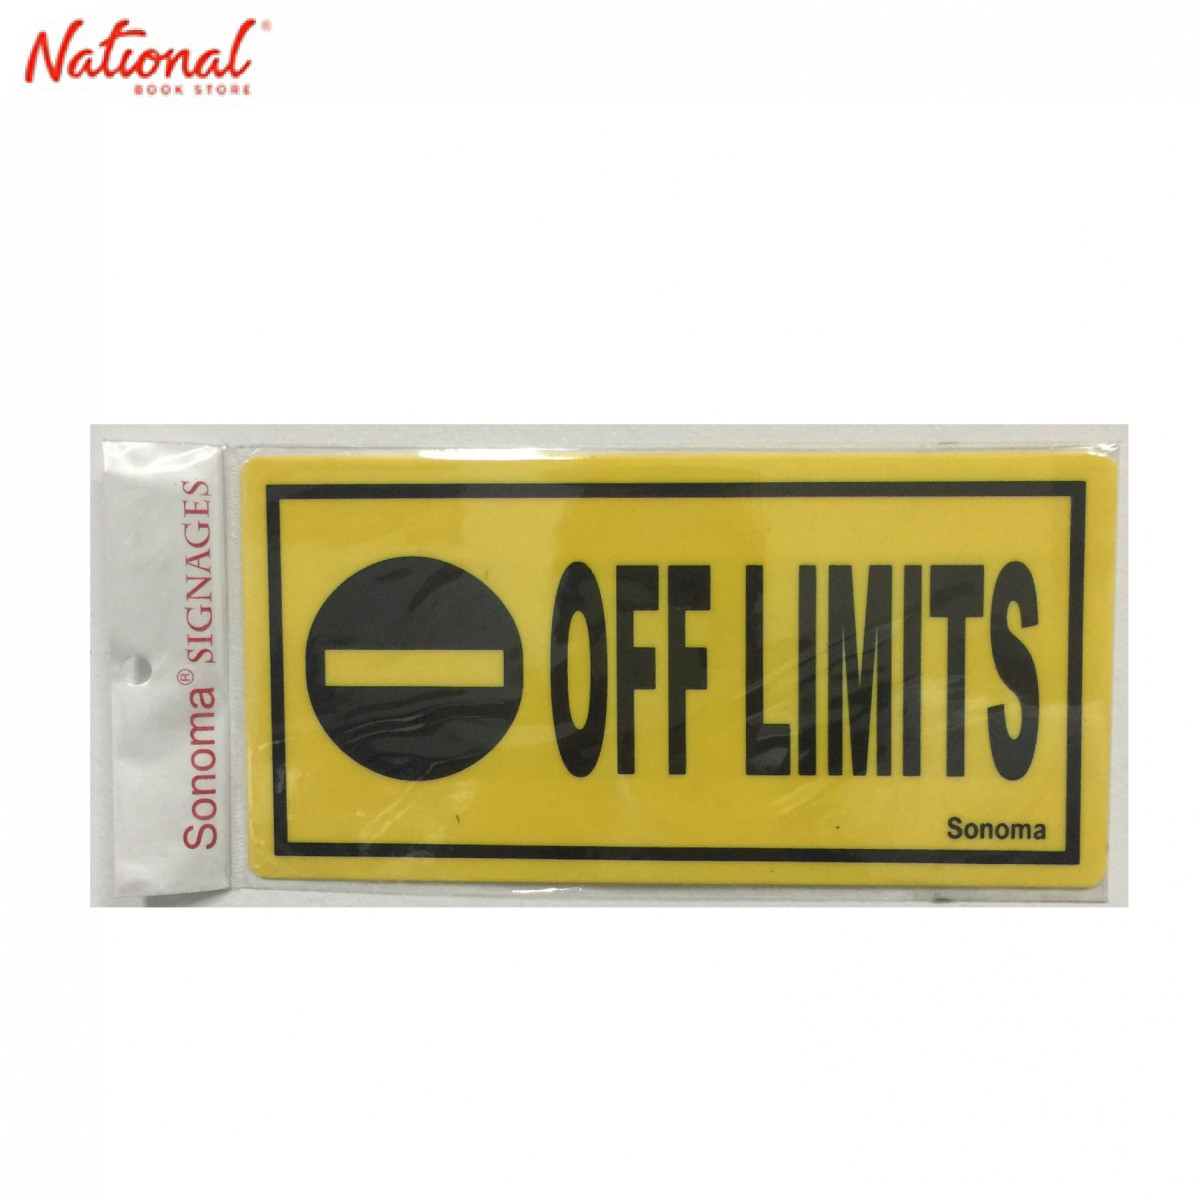 Sonoma Signage 4x8 inches Yellow Off Limits - Office - Business - Essentials